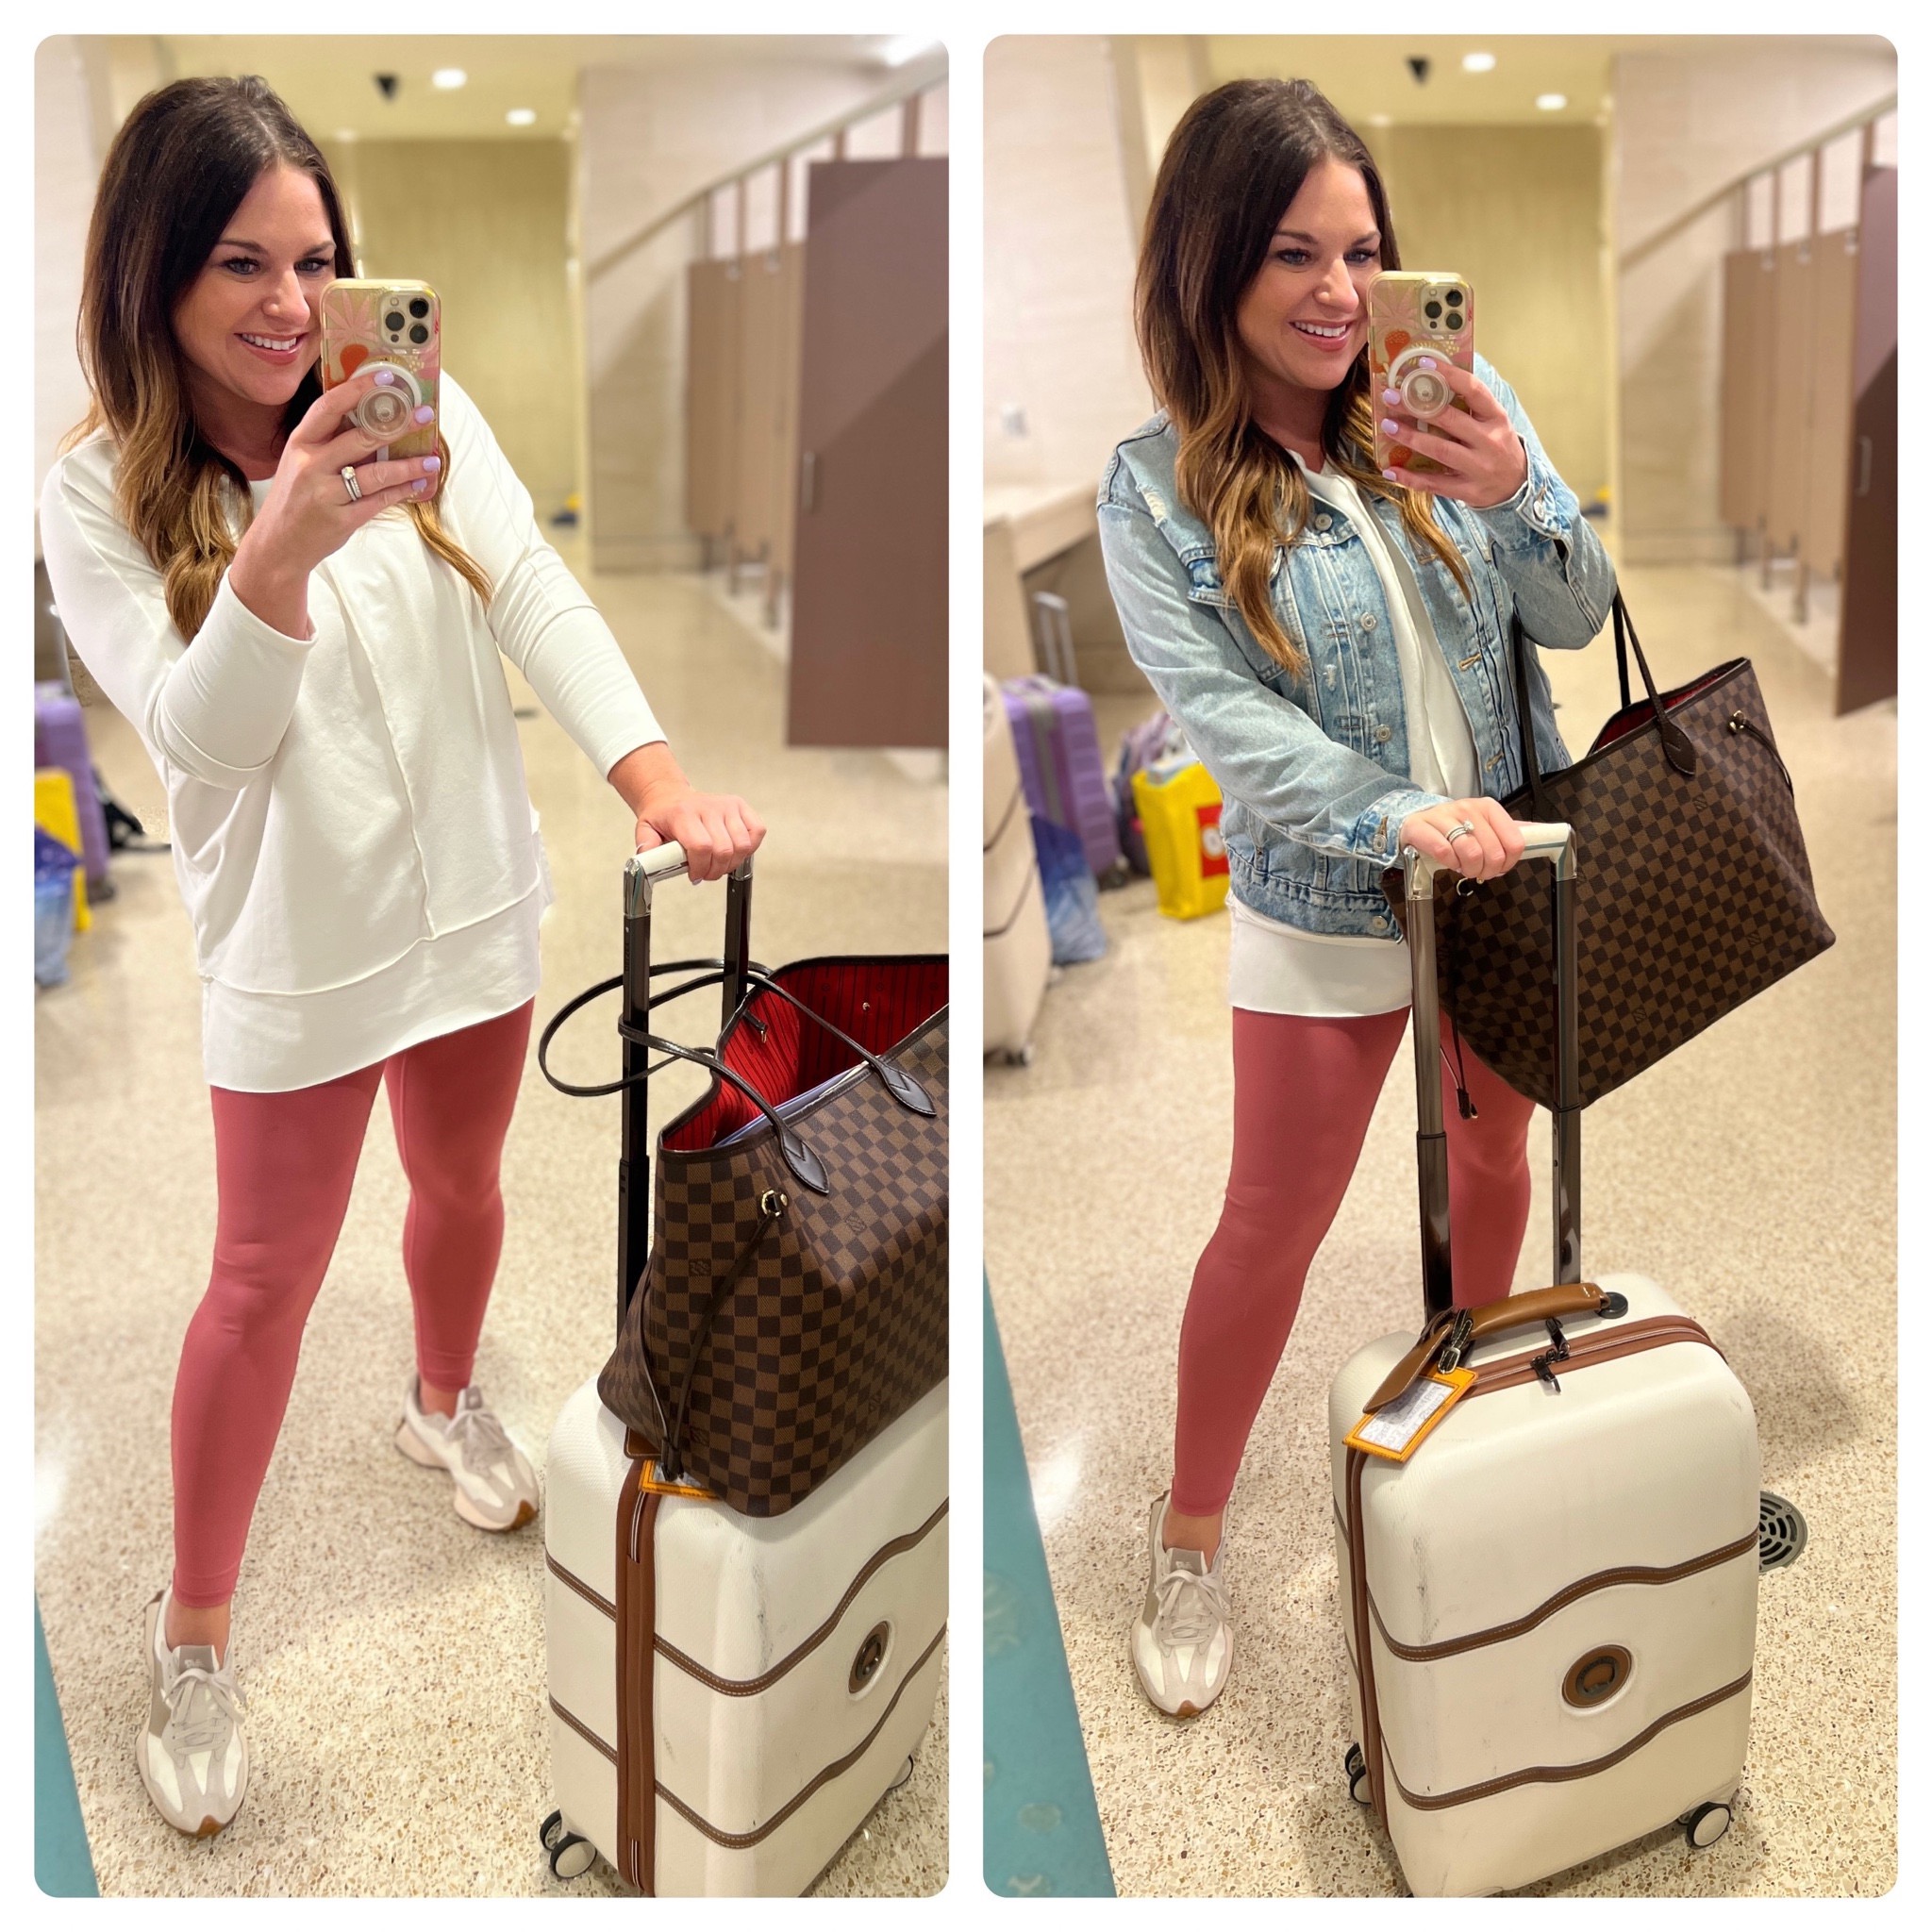 Stylish and Comfortable: Travel Outfit Ideas & Must Haves for Your Next Adventure

travel, travel outfit, vacation, vacation outfit, casual outfit, summer vacation, spring vacation, pink leggings, suitcase, carry-on bag, denim jacket, white long sleeve